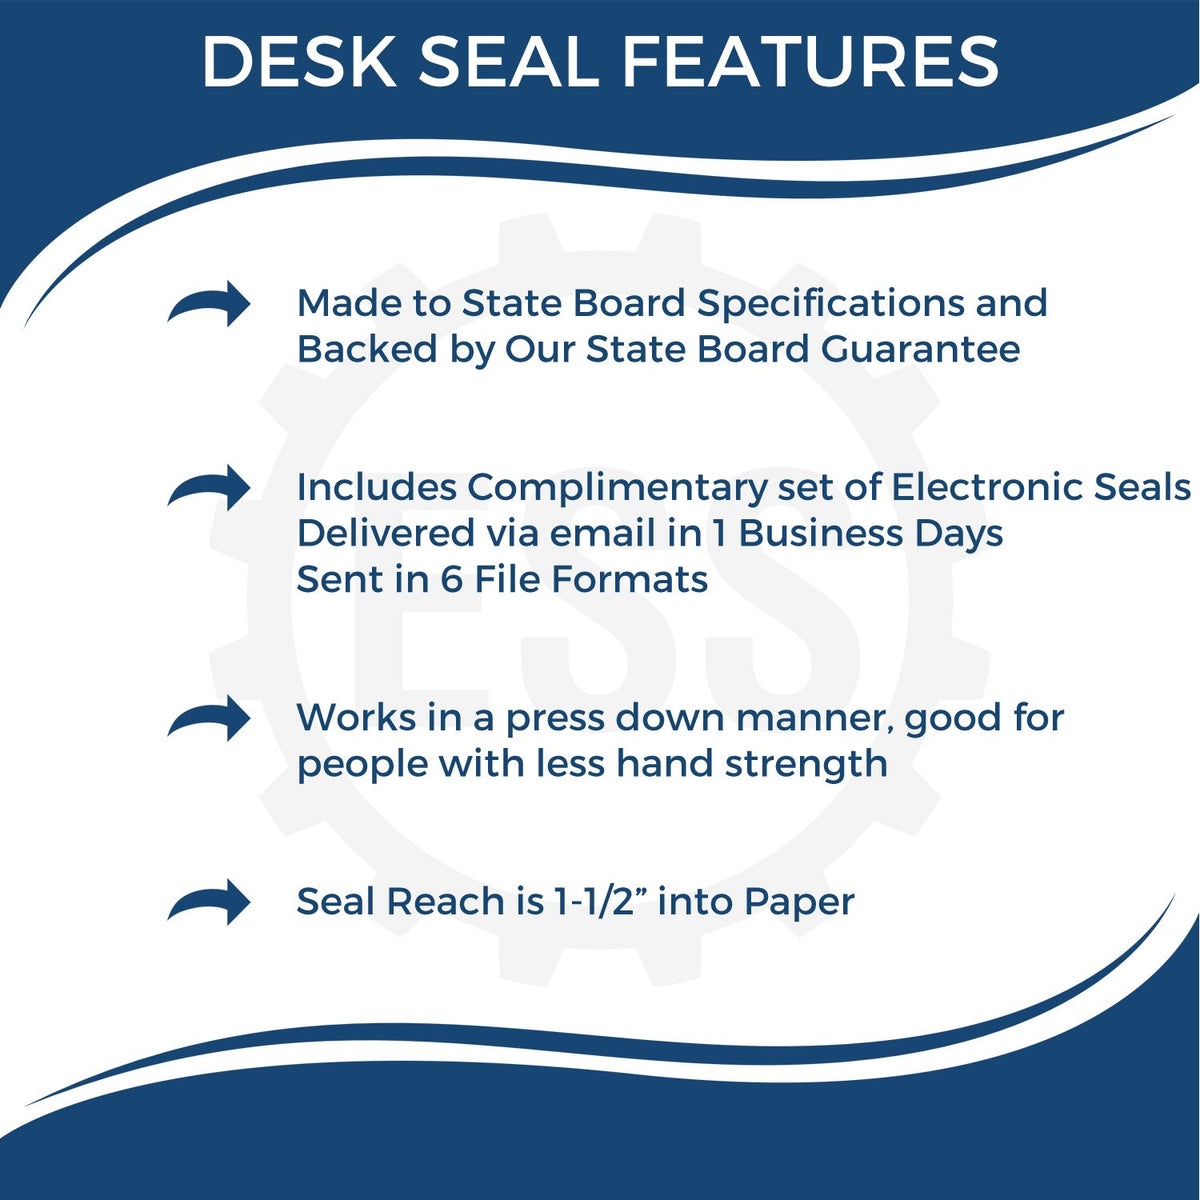 A picture of an infographic highlighting the selling points for the Michigan Desk Surveyor Seal Embosser